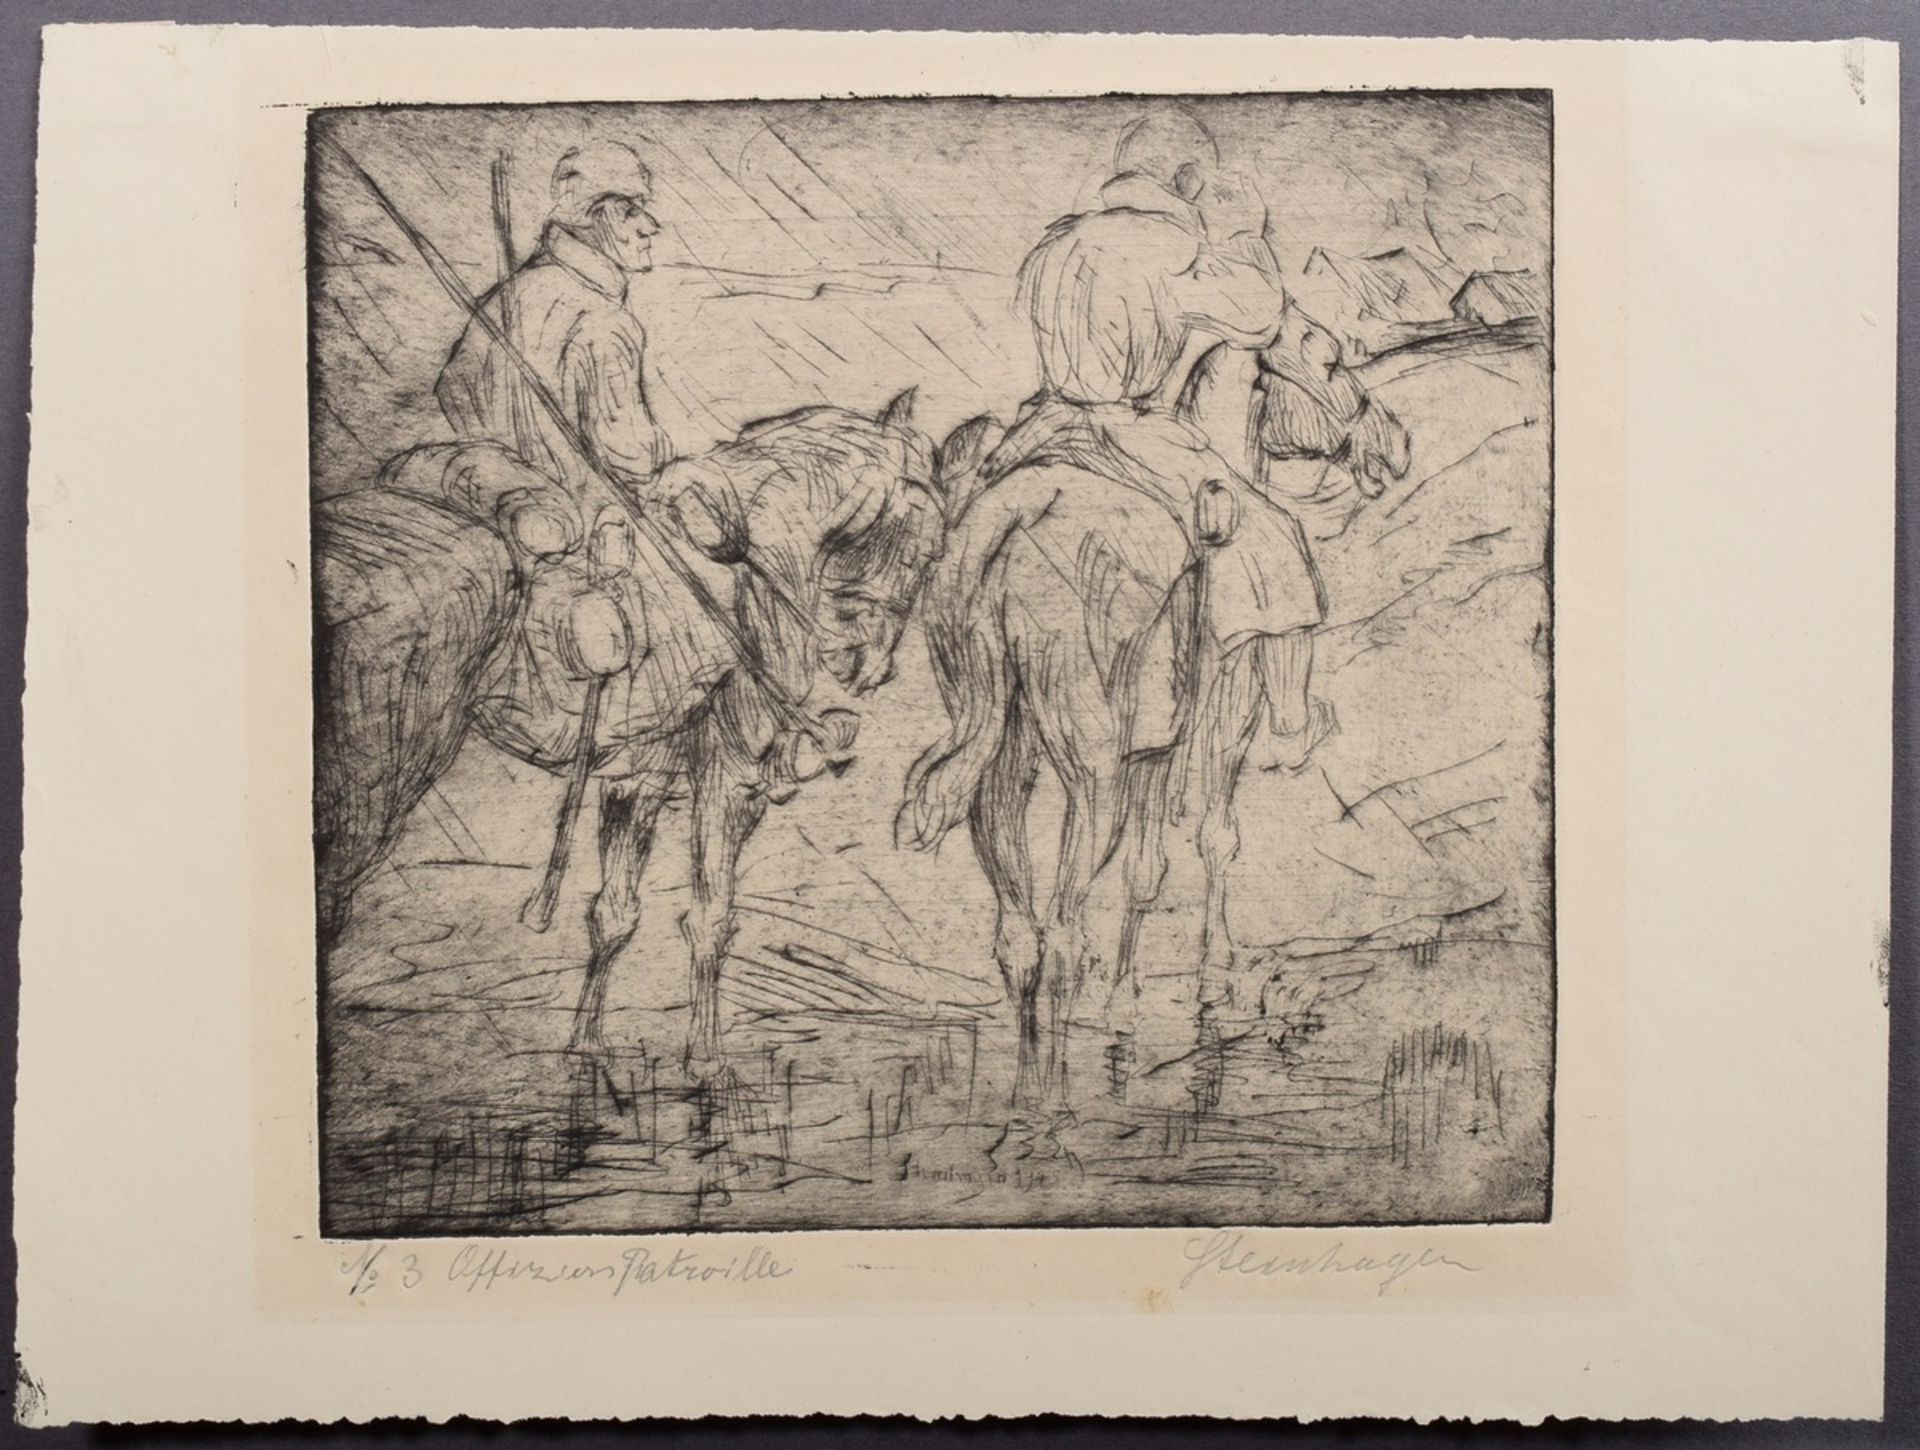 5 Steinhagen, Heinrich (1880-1948) "Scenes from World War I" 1915/16, etchings, some signed and dat - Image 11 of 11